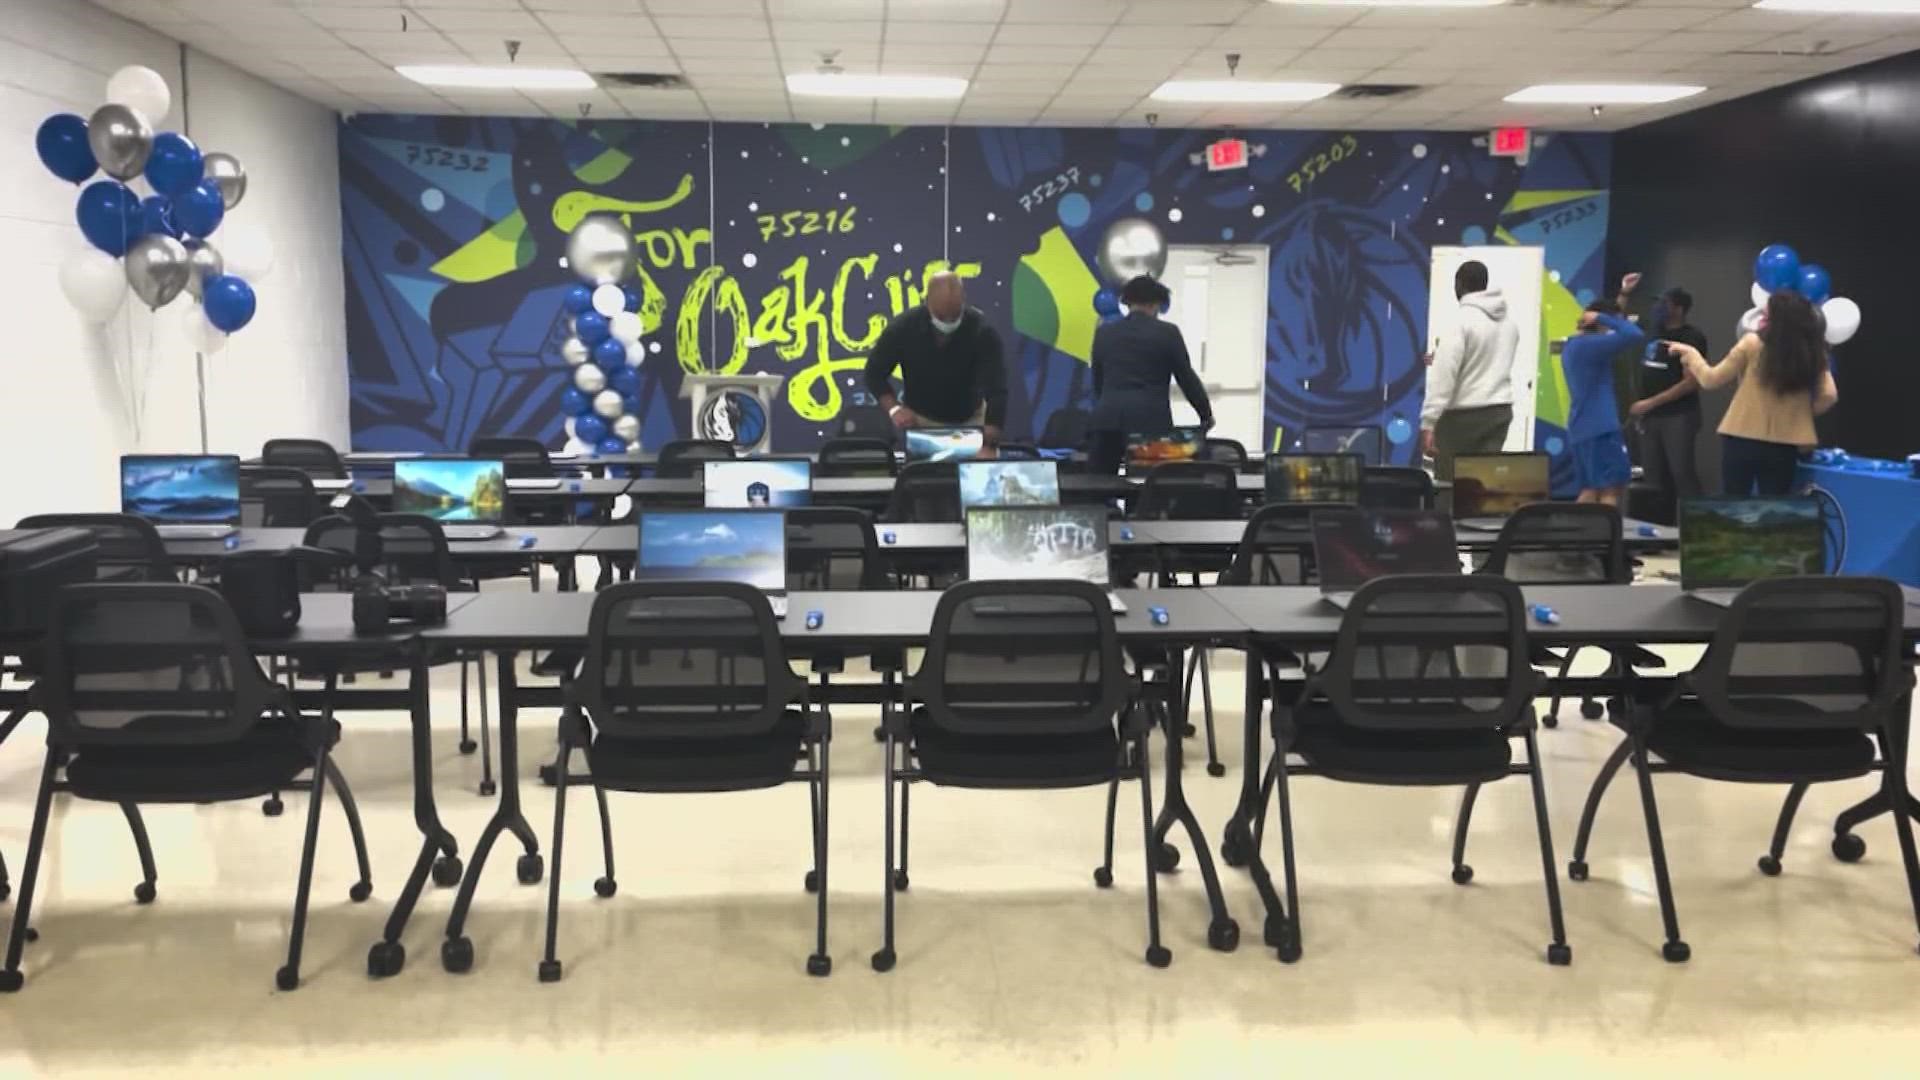 The Dallas Mavericks sponsored brand new computers, virtual devices, and other tech resources that will help For Oak Cliff’s clients and community members.